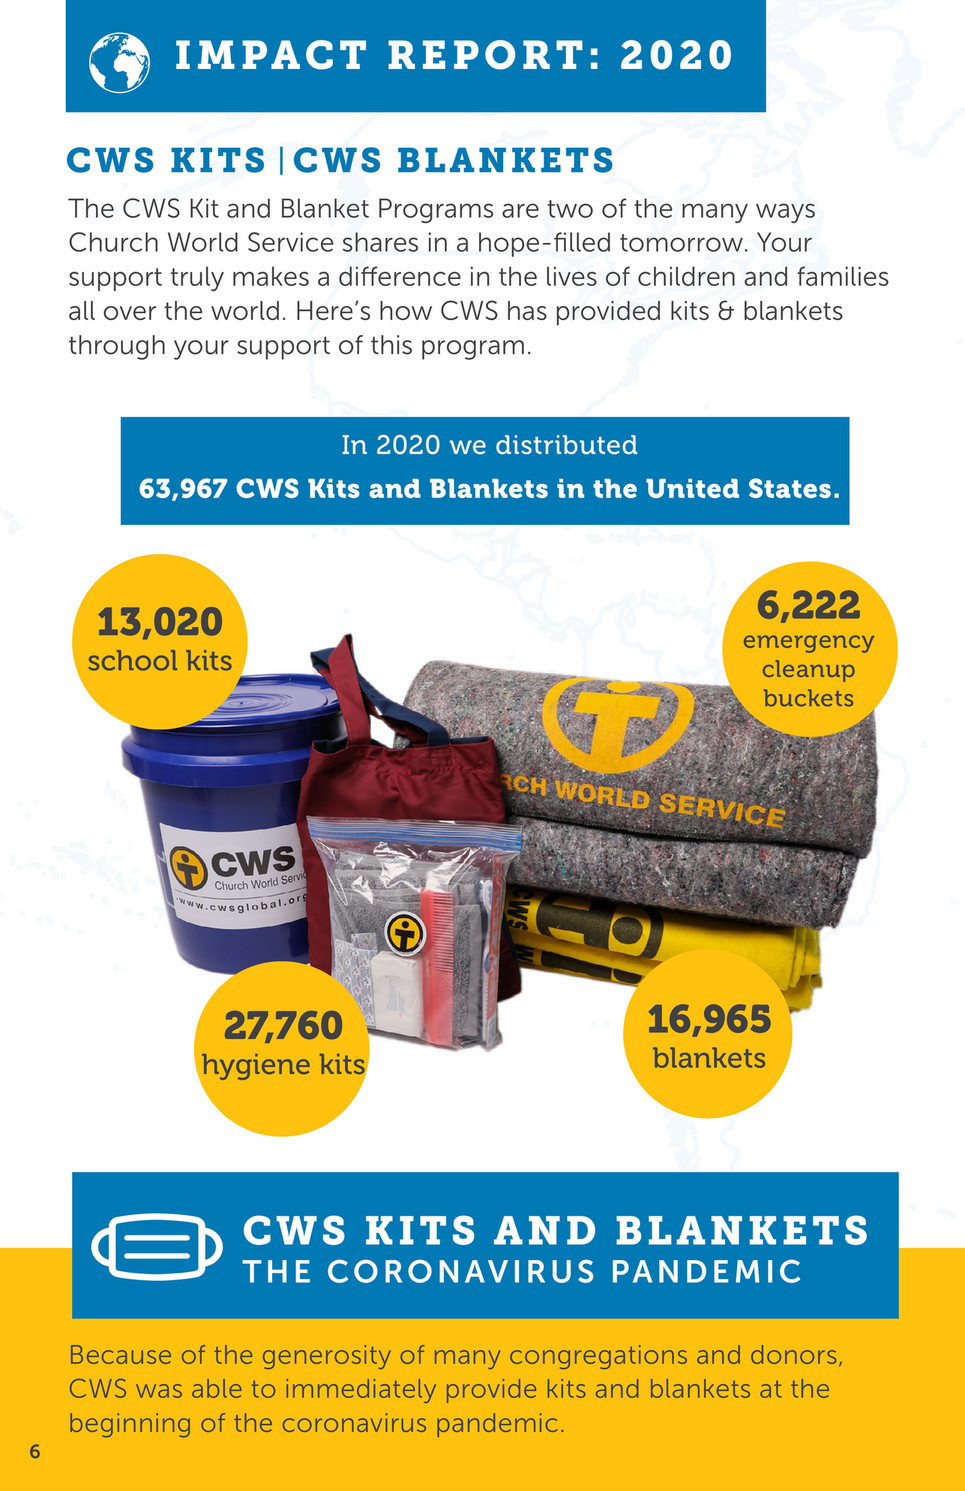 CWS Buckets and Kits  Help Communities in Need Around the World